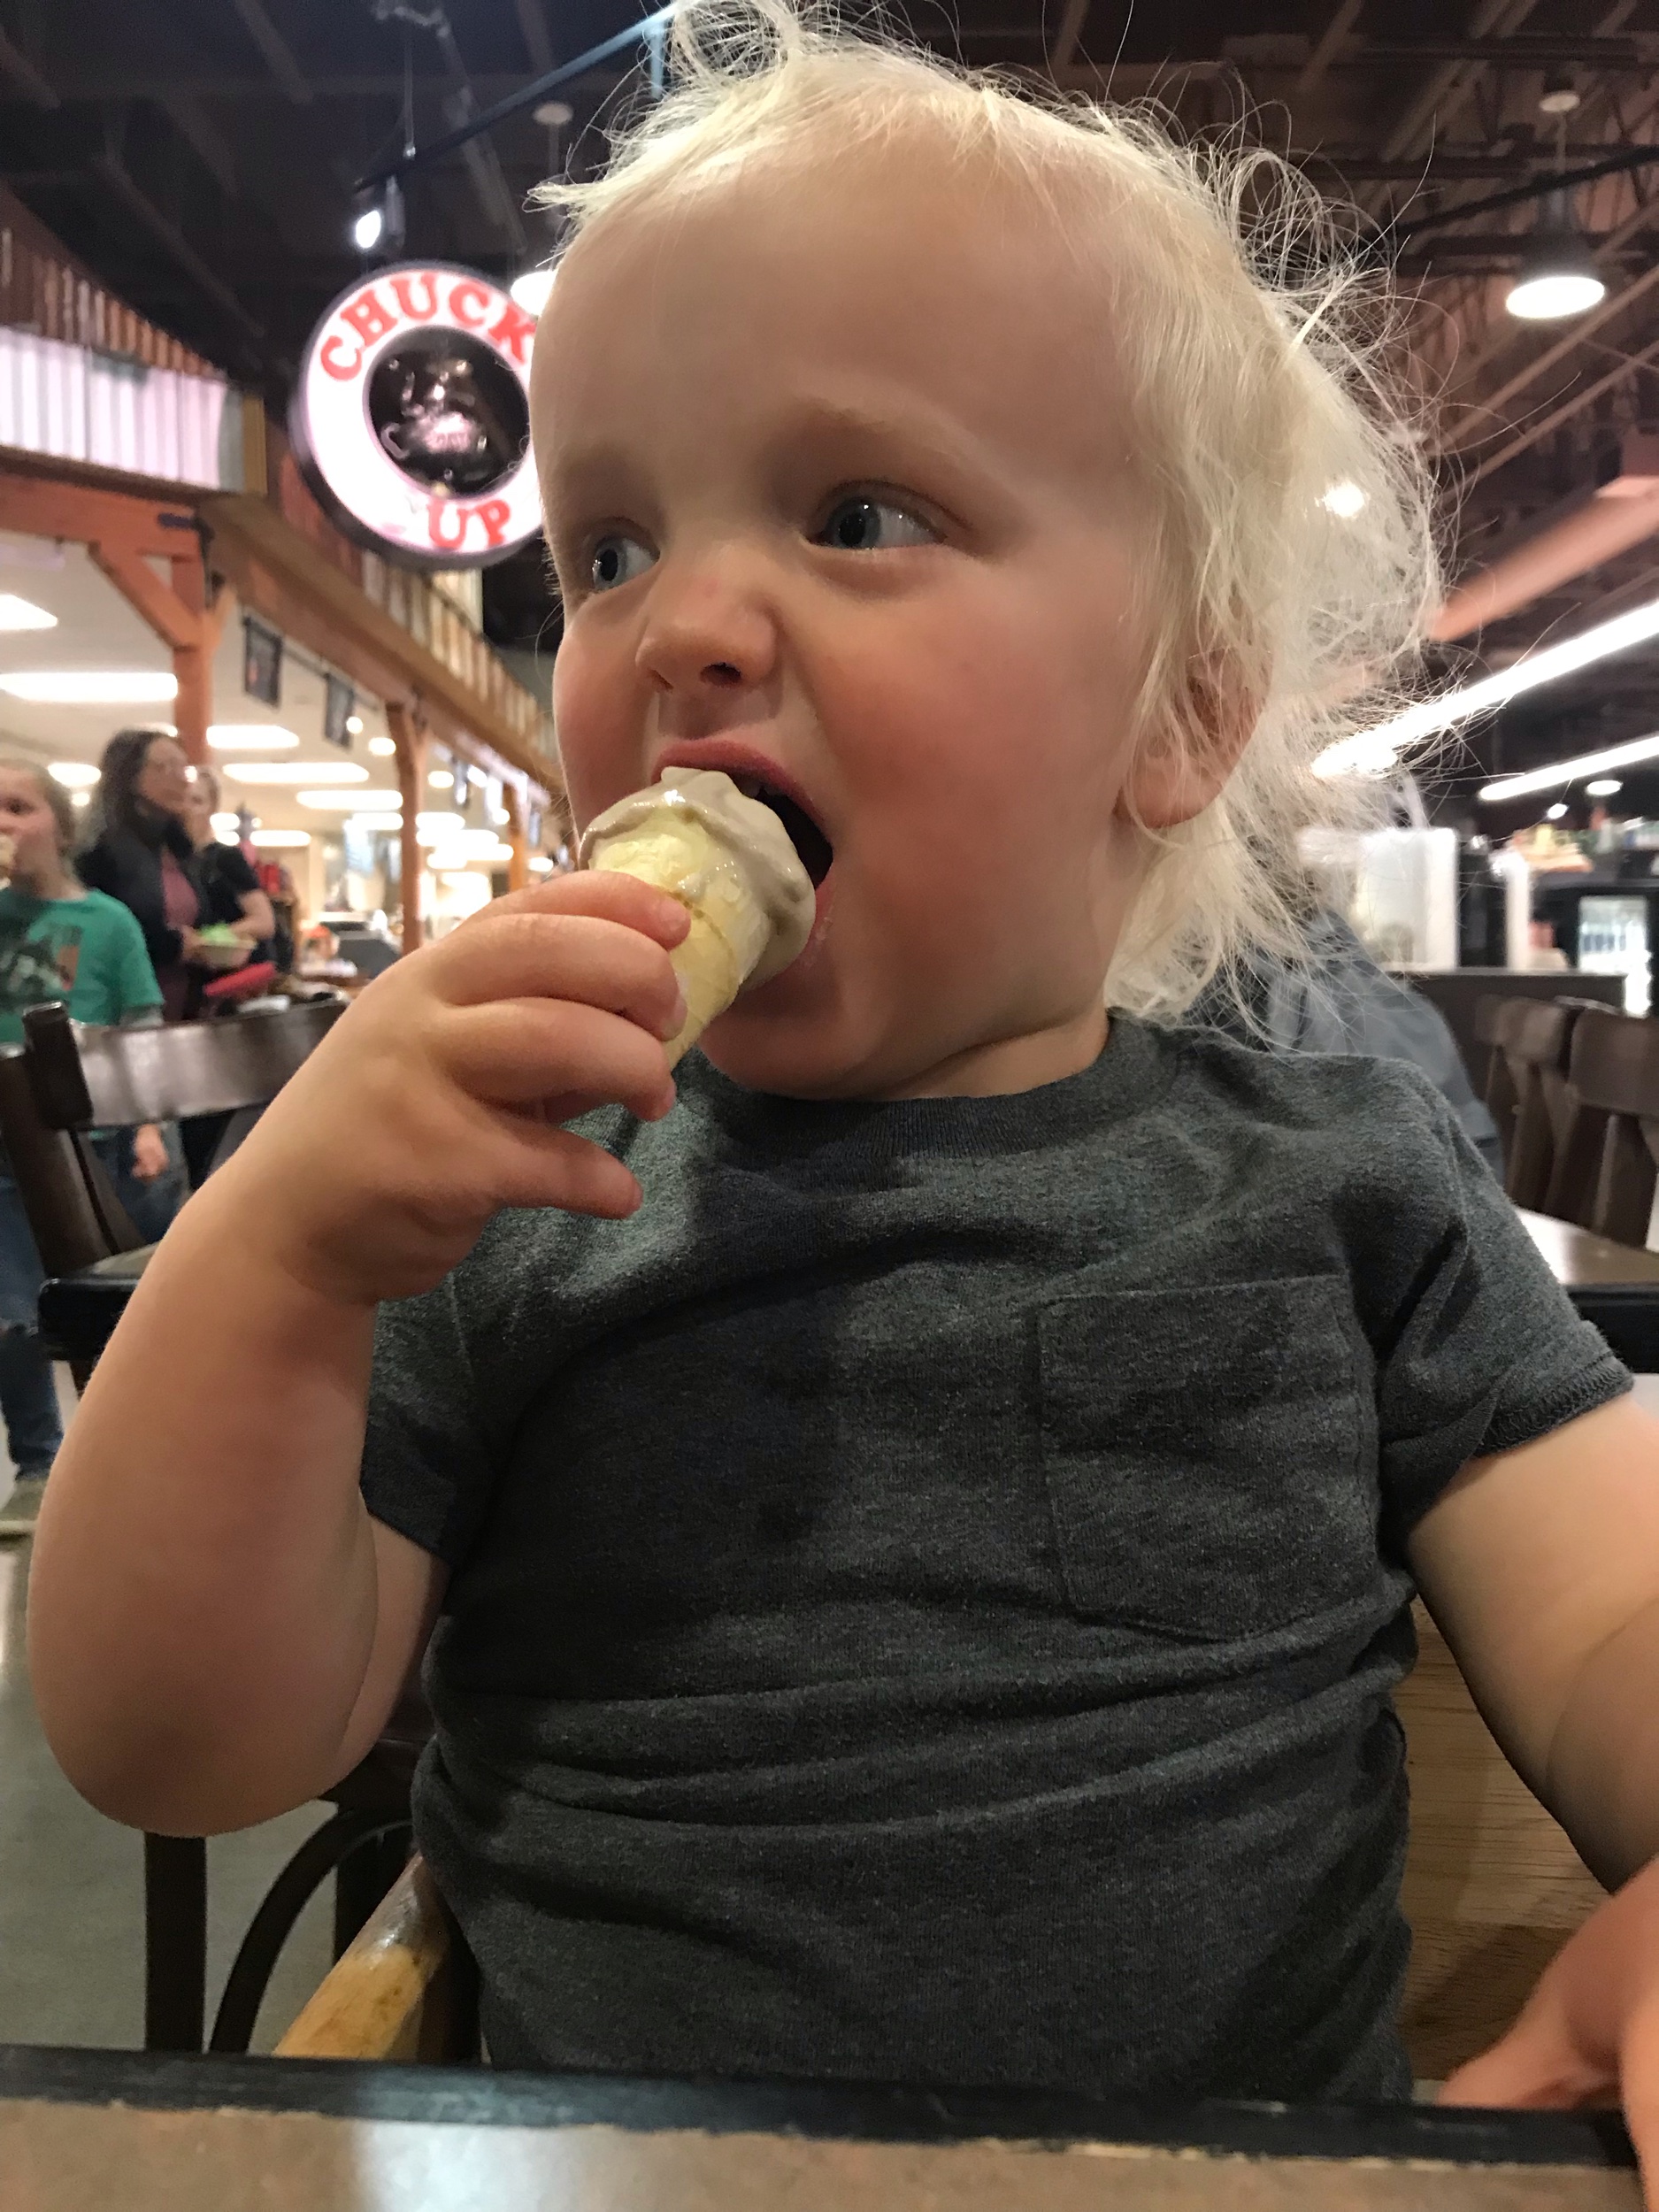 Toddler-age boy eating ice cream cone.